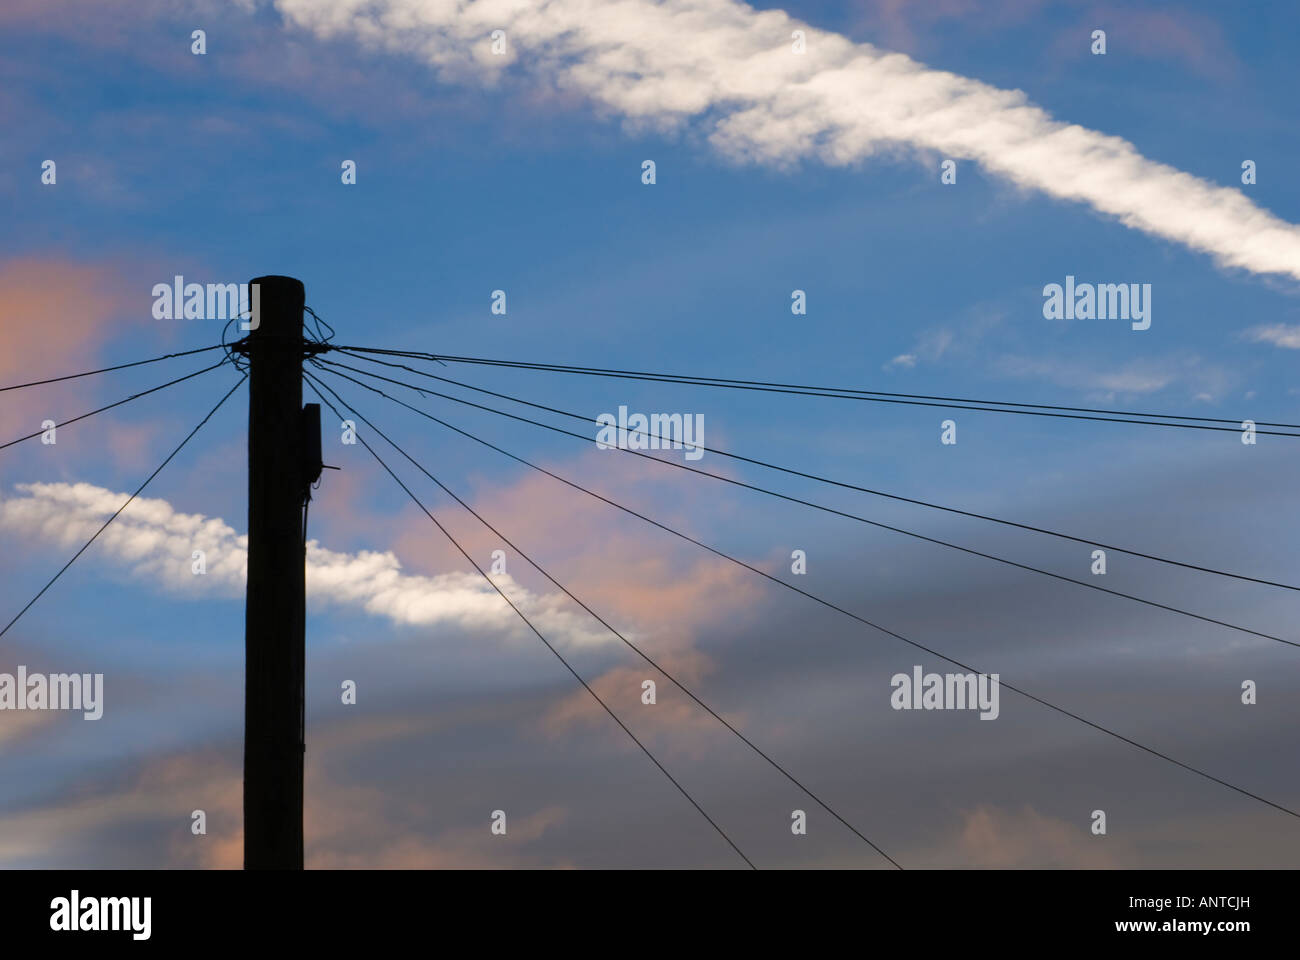 Telephone cables and telegraph pole silhouetted against a blue sky and jet trails Stock Photo